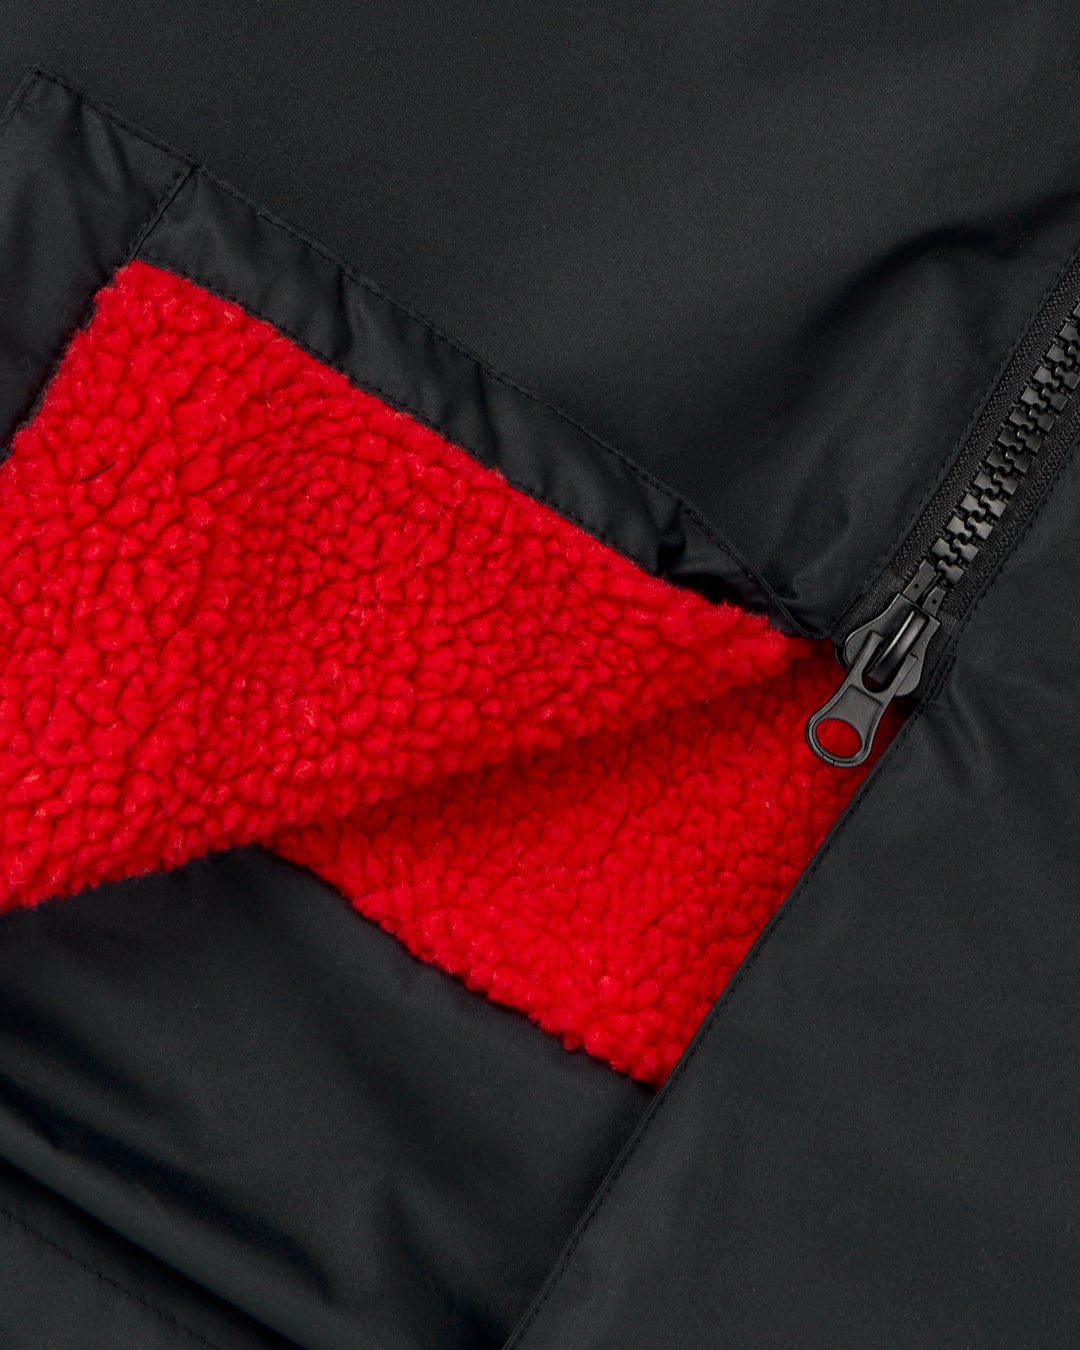 Close-up of a Saltrock Recycled Kids Four Seasons Changing Robe in Black/Red with a red fleece-lined pocket partially unzipped, displaying the textured interior made from recycled material.